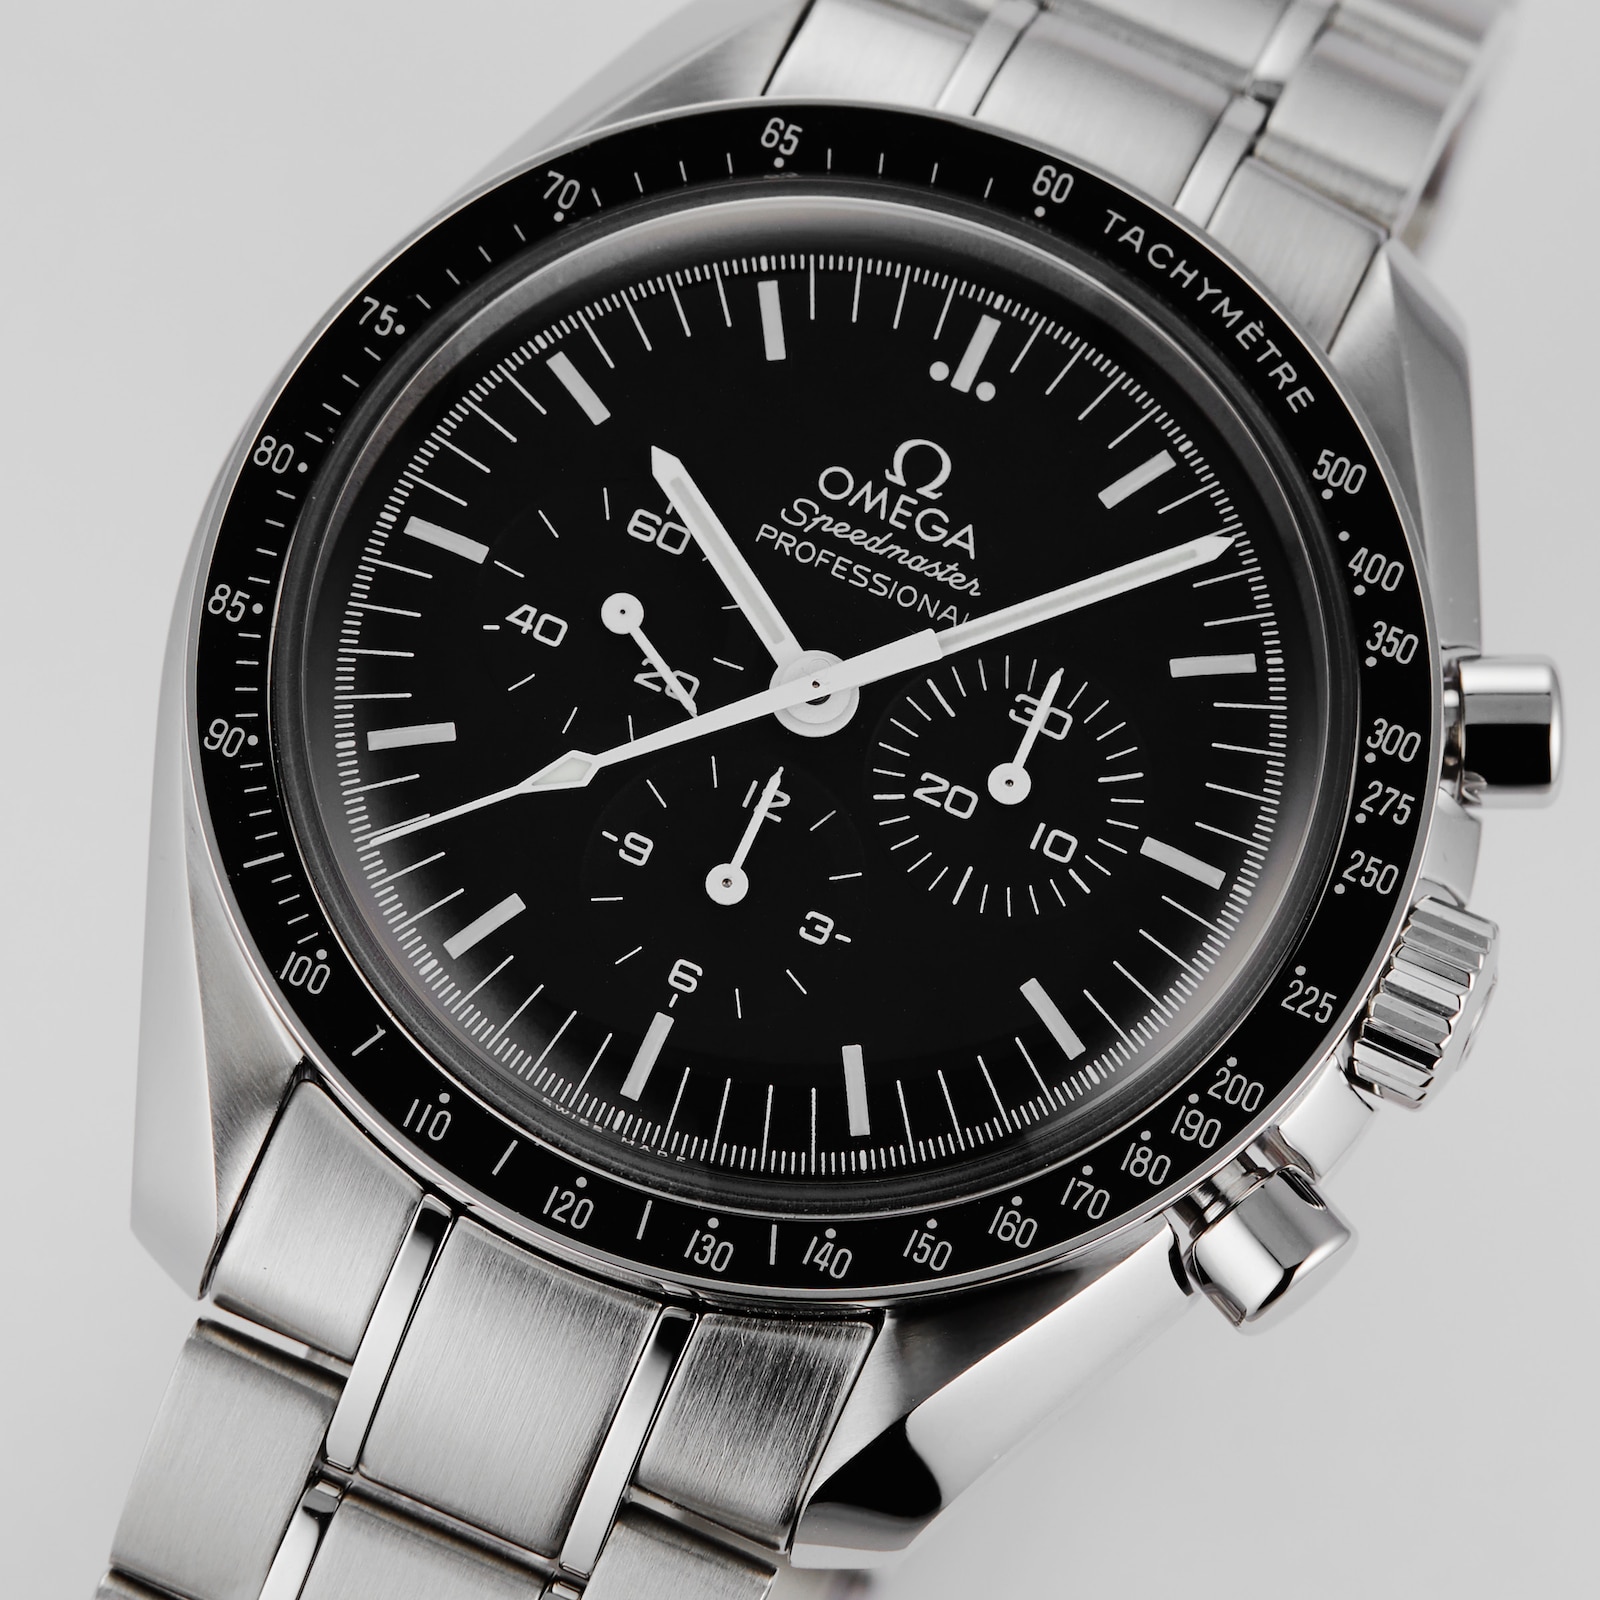 Omega Speedmaster Professional Moonwatch First Watch On The Moon